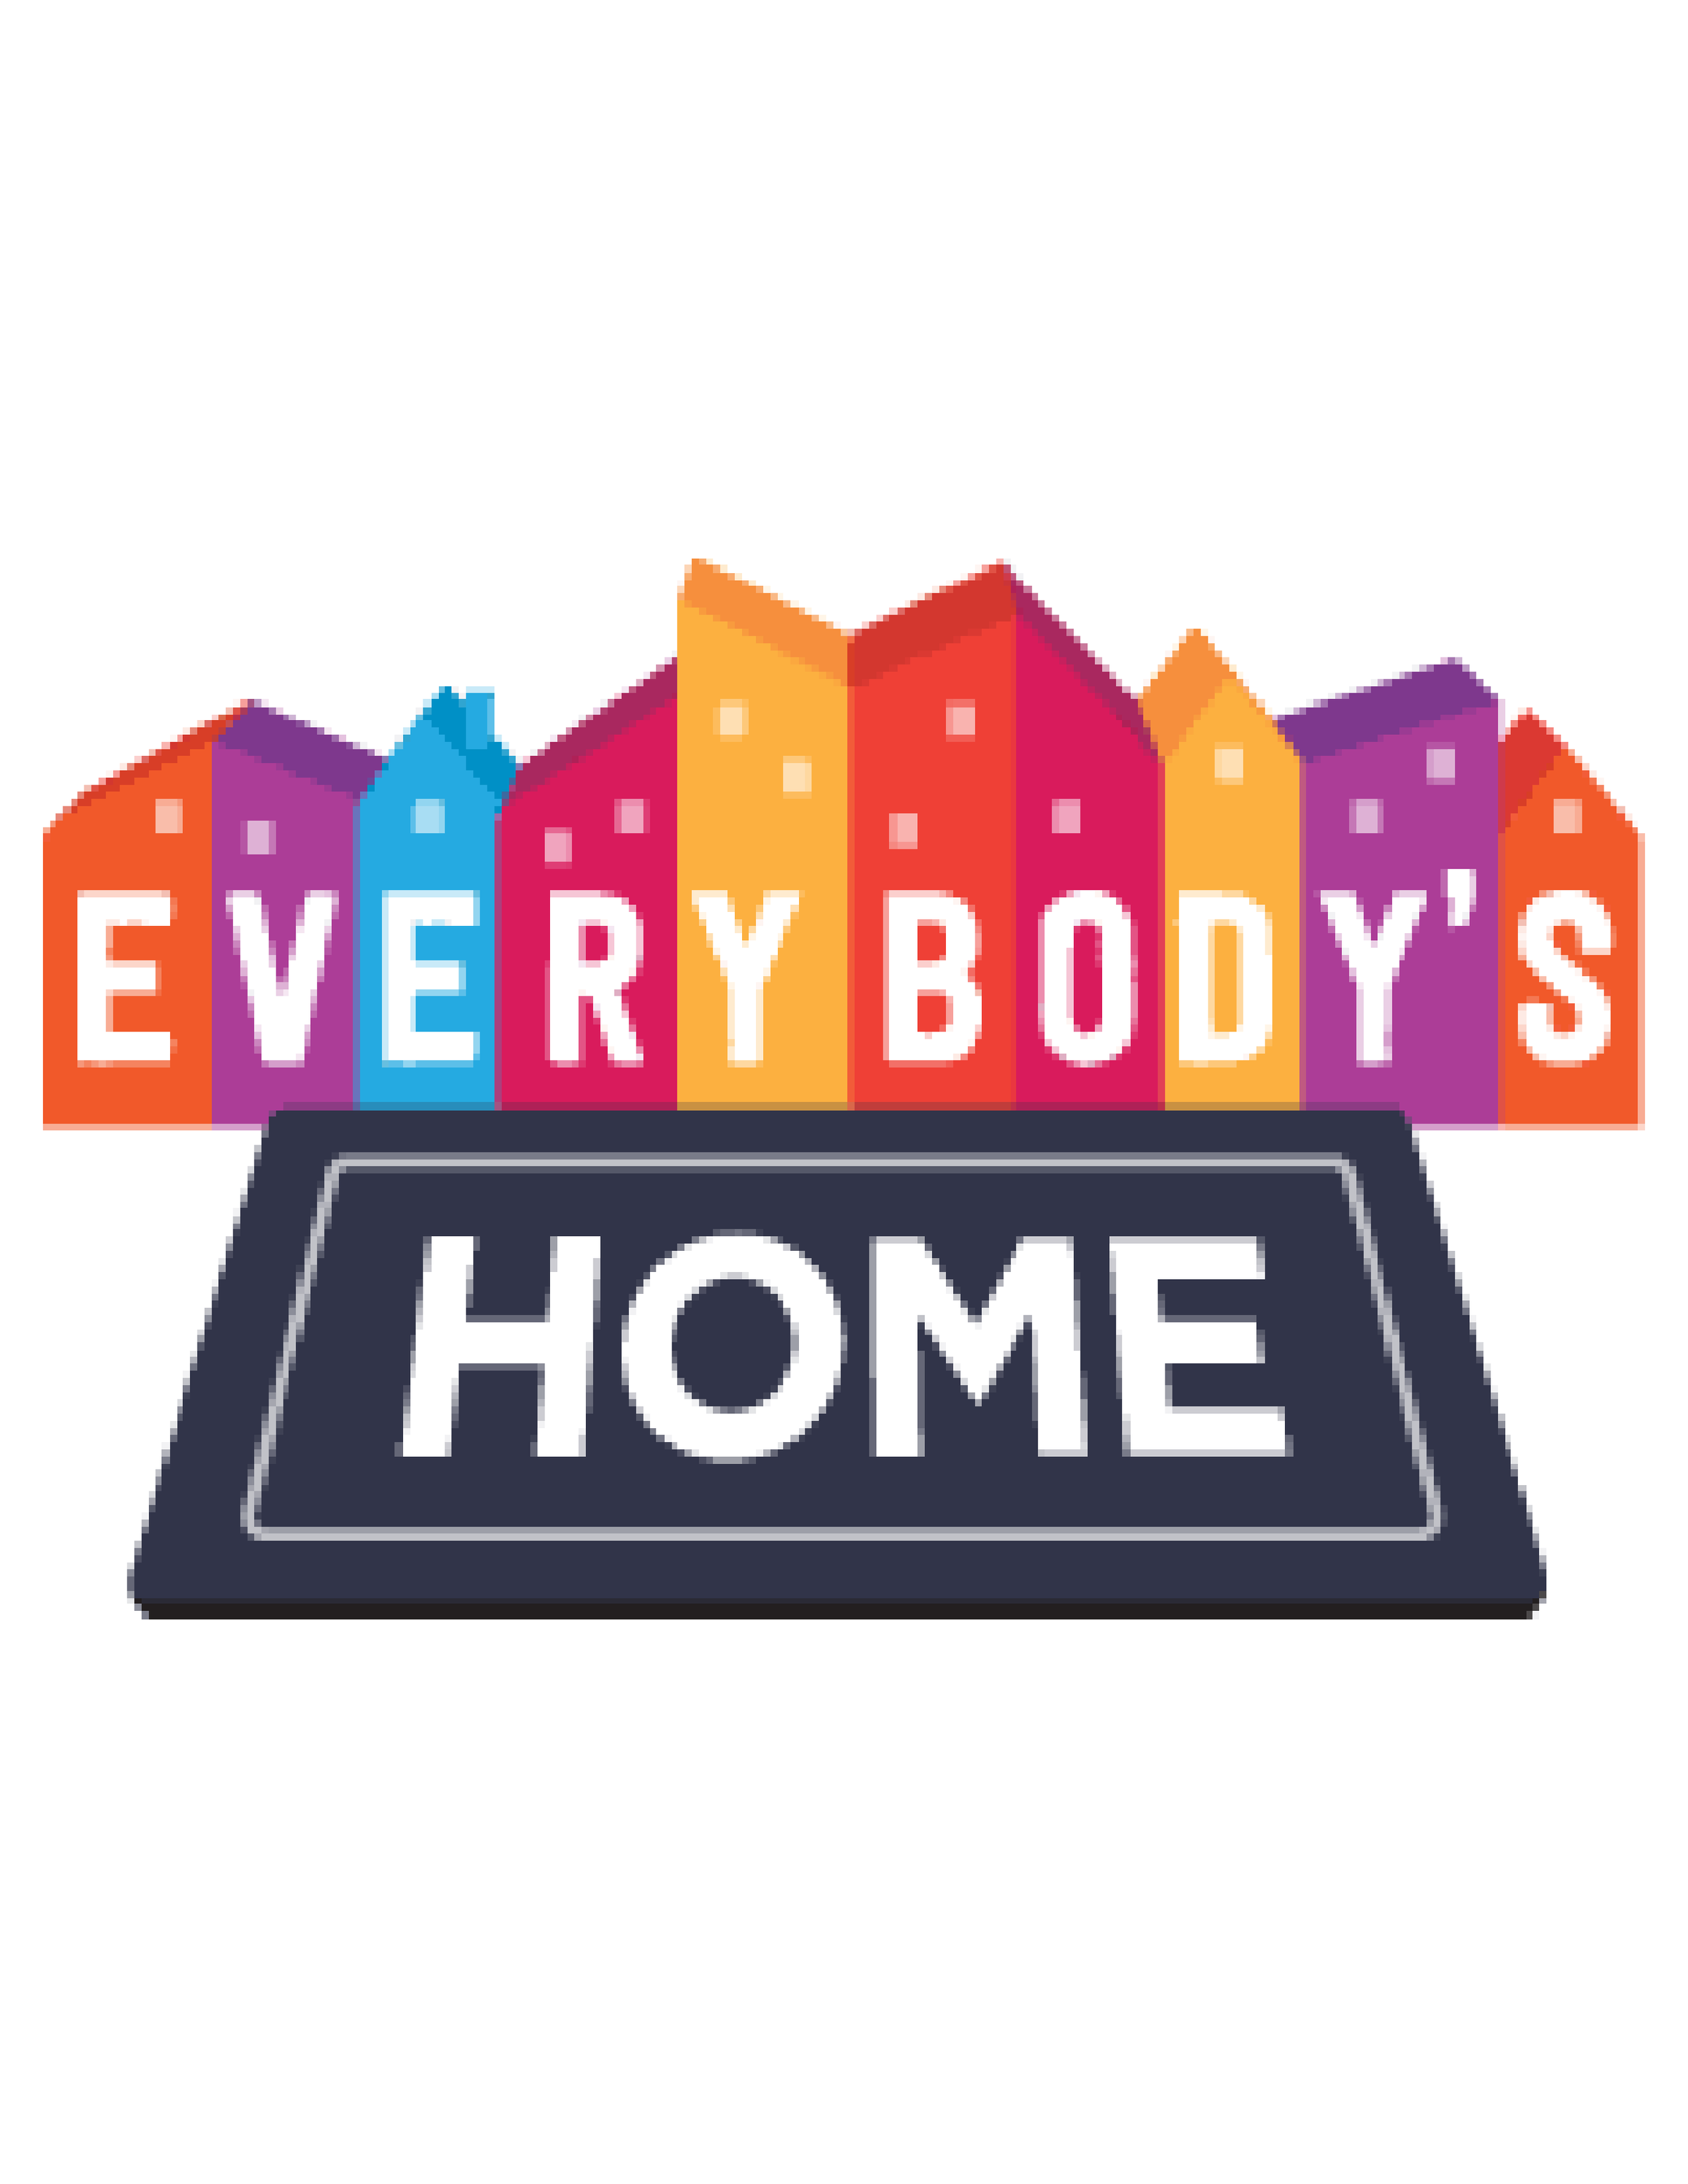 A colourfull logo of a cityscape with the word 'everybody' spelled out with a letter on each building and the word 'home' on a large doormat underneath the buildings